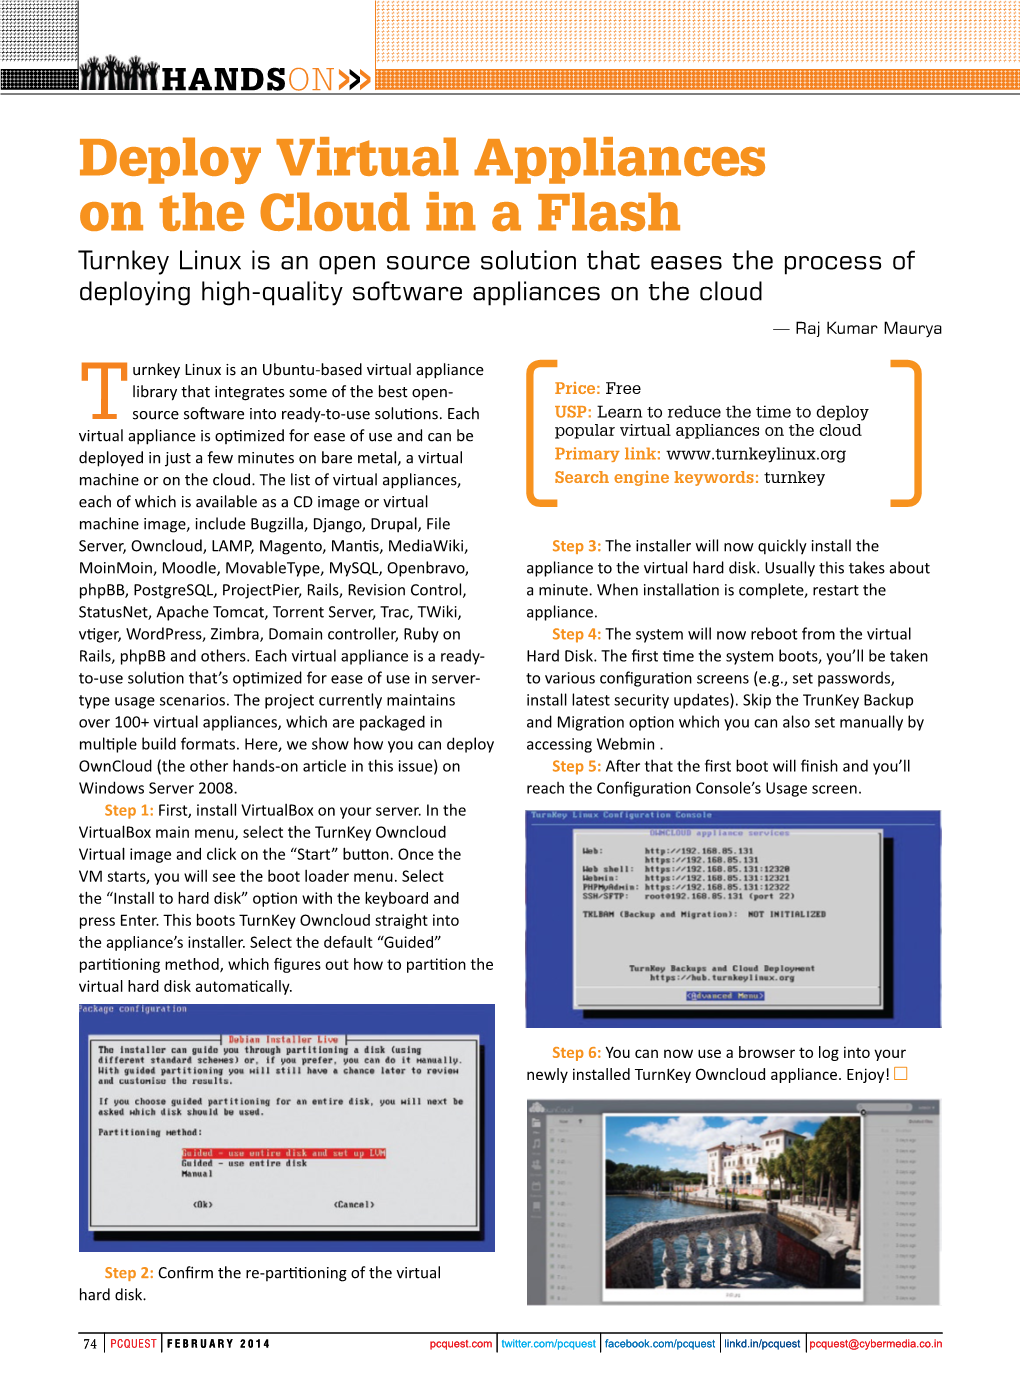 Deploy Virtual Appliances on the Cloud in a Flash